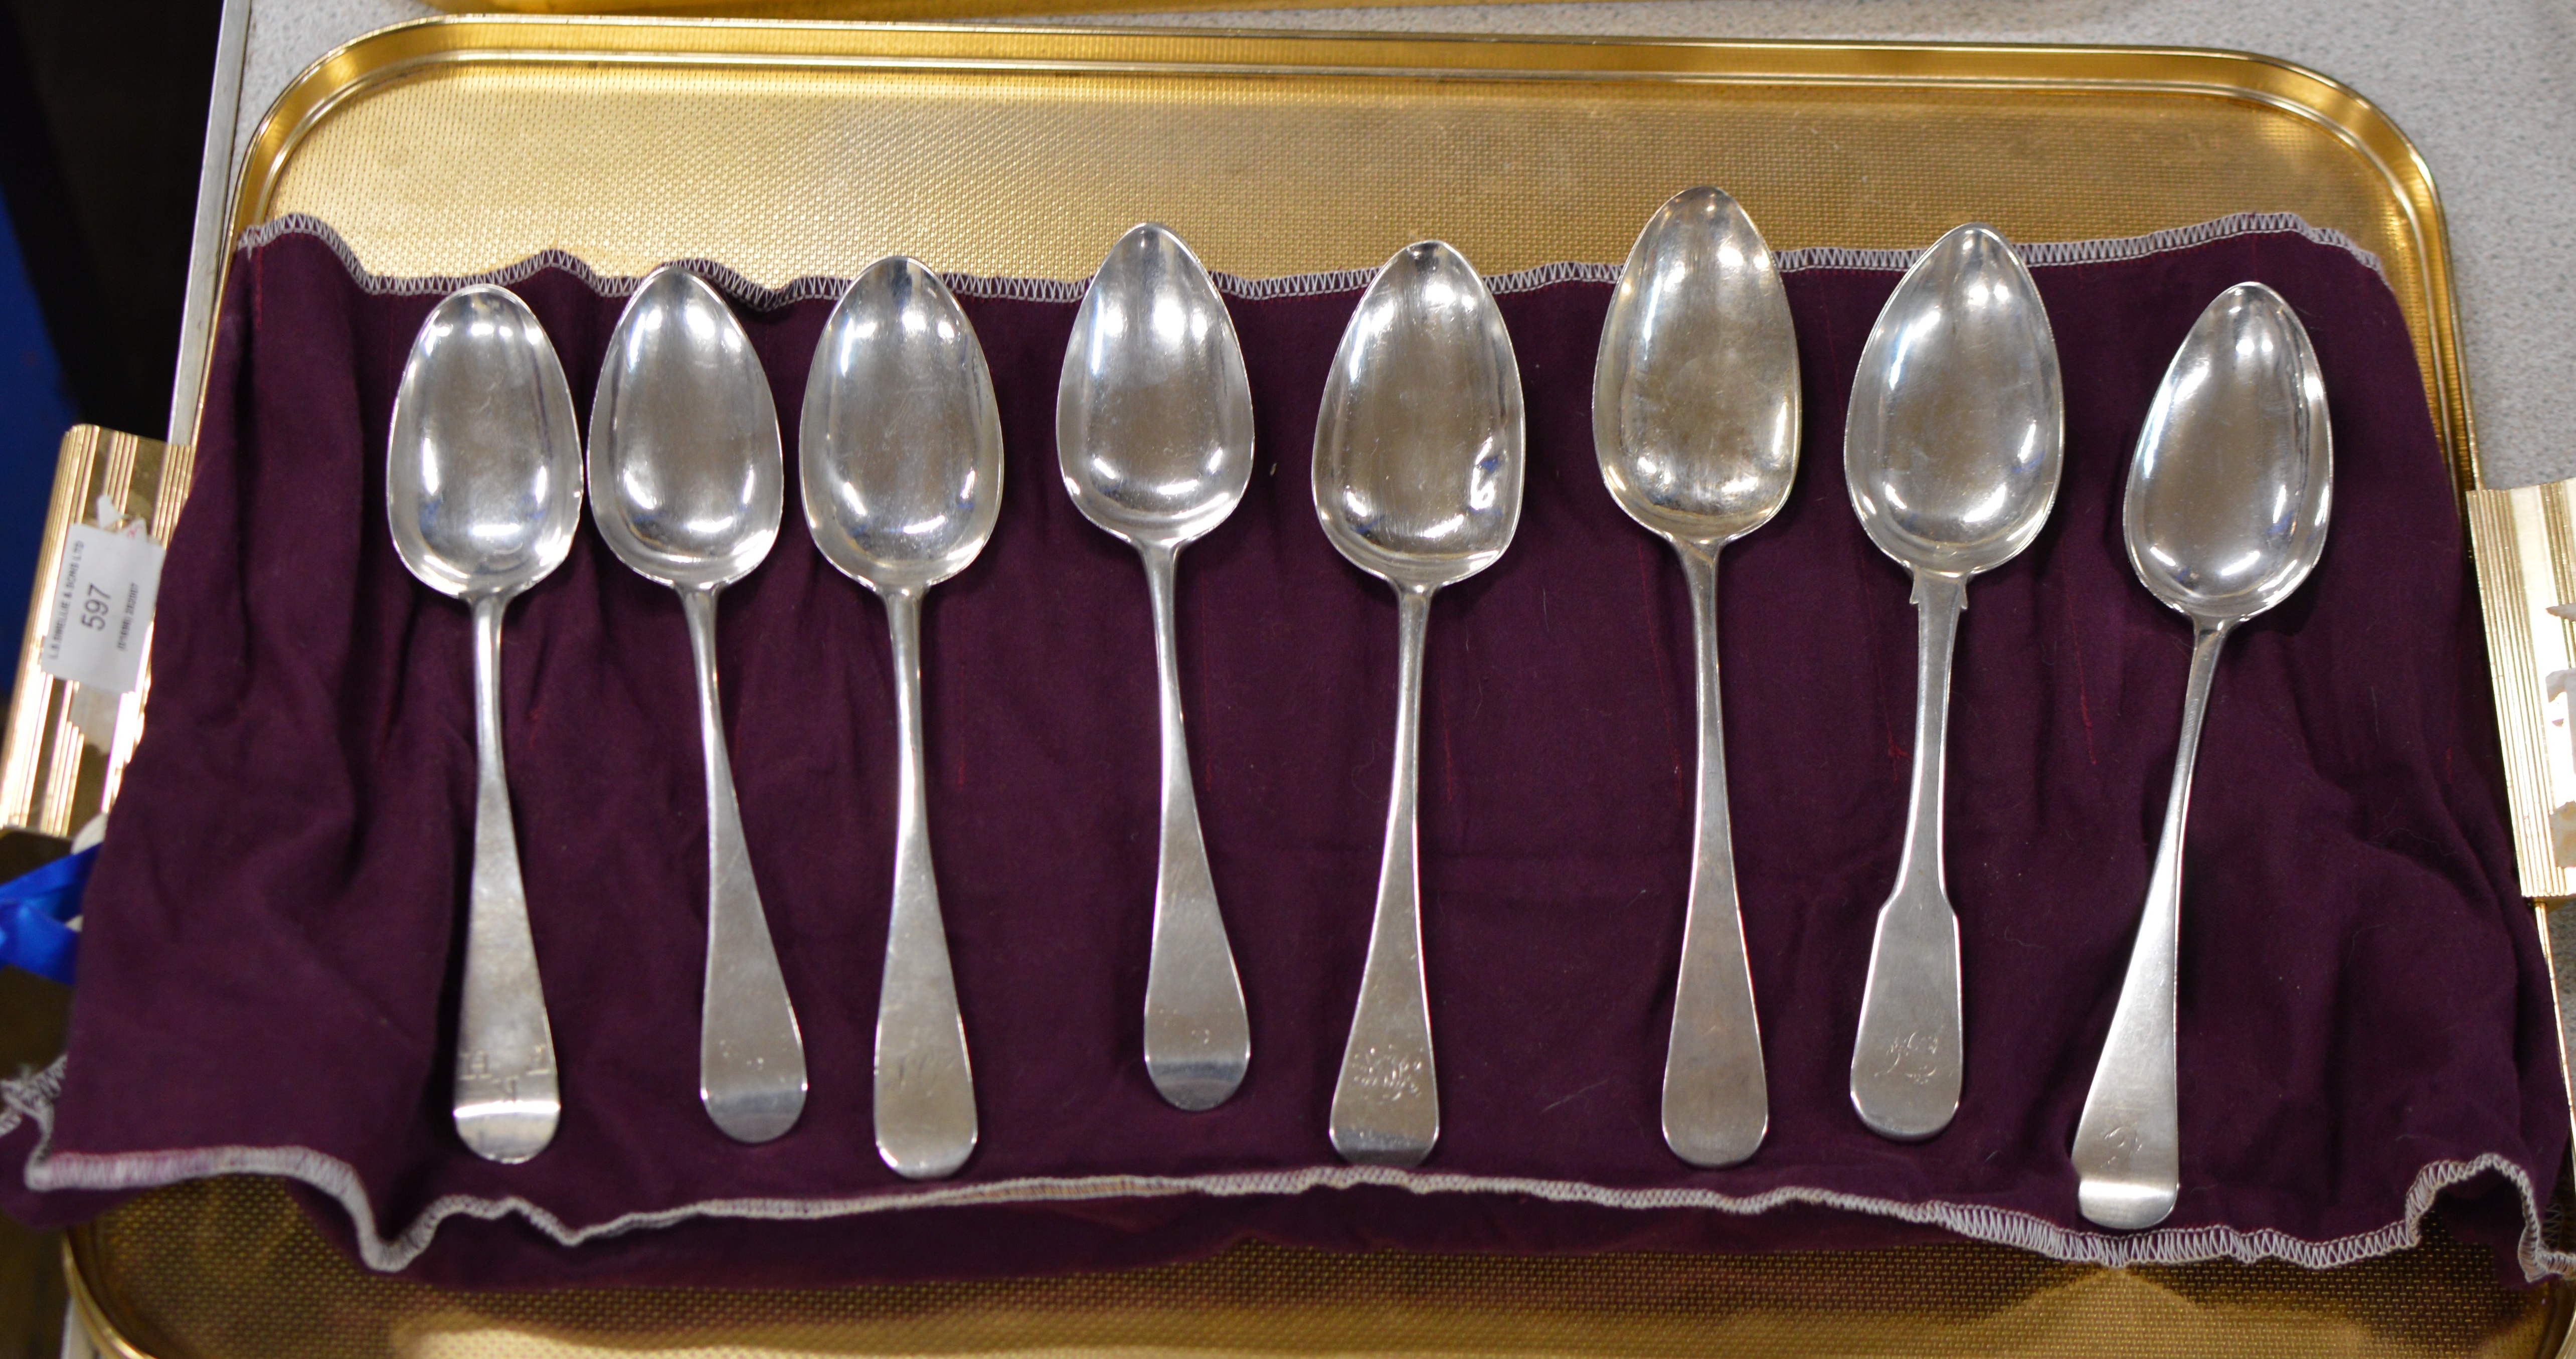 A COLLECTION OF 8 VARIOUS LONDON SILVER & PROVINCIAL SILVER TABLE SPOONS - APPROXIMATE COMBINED